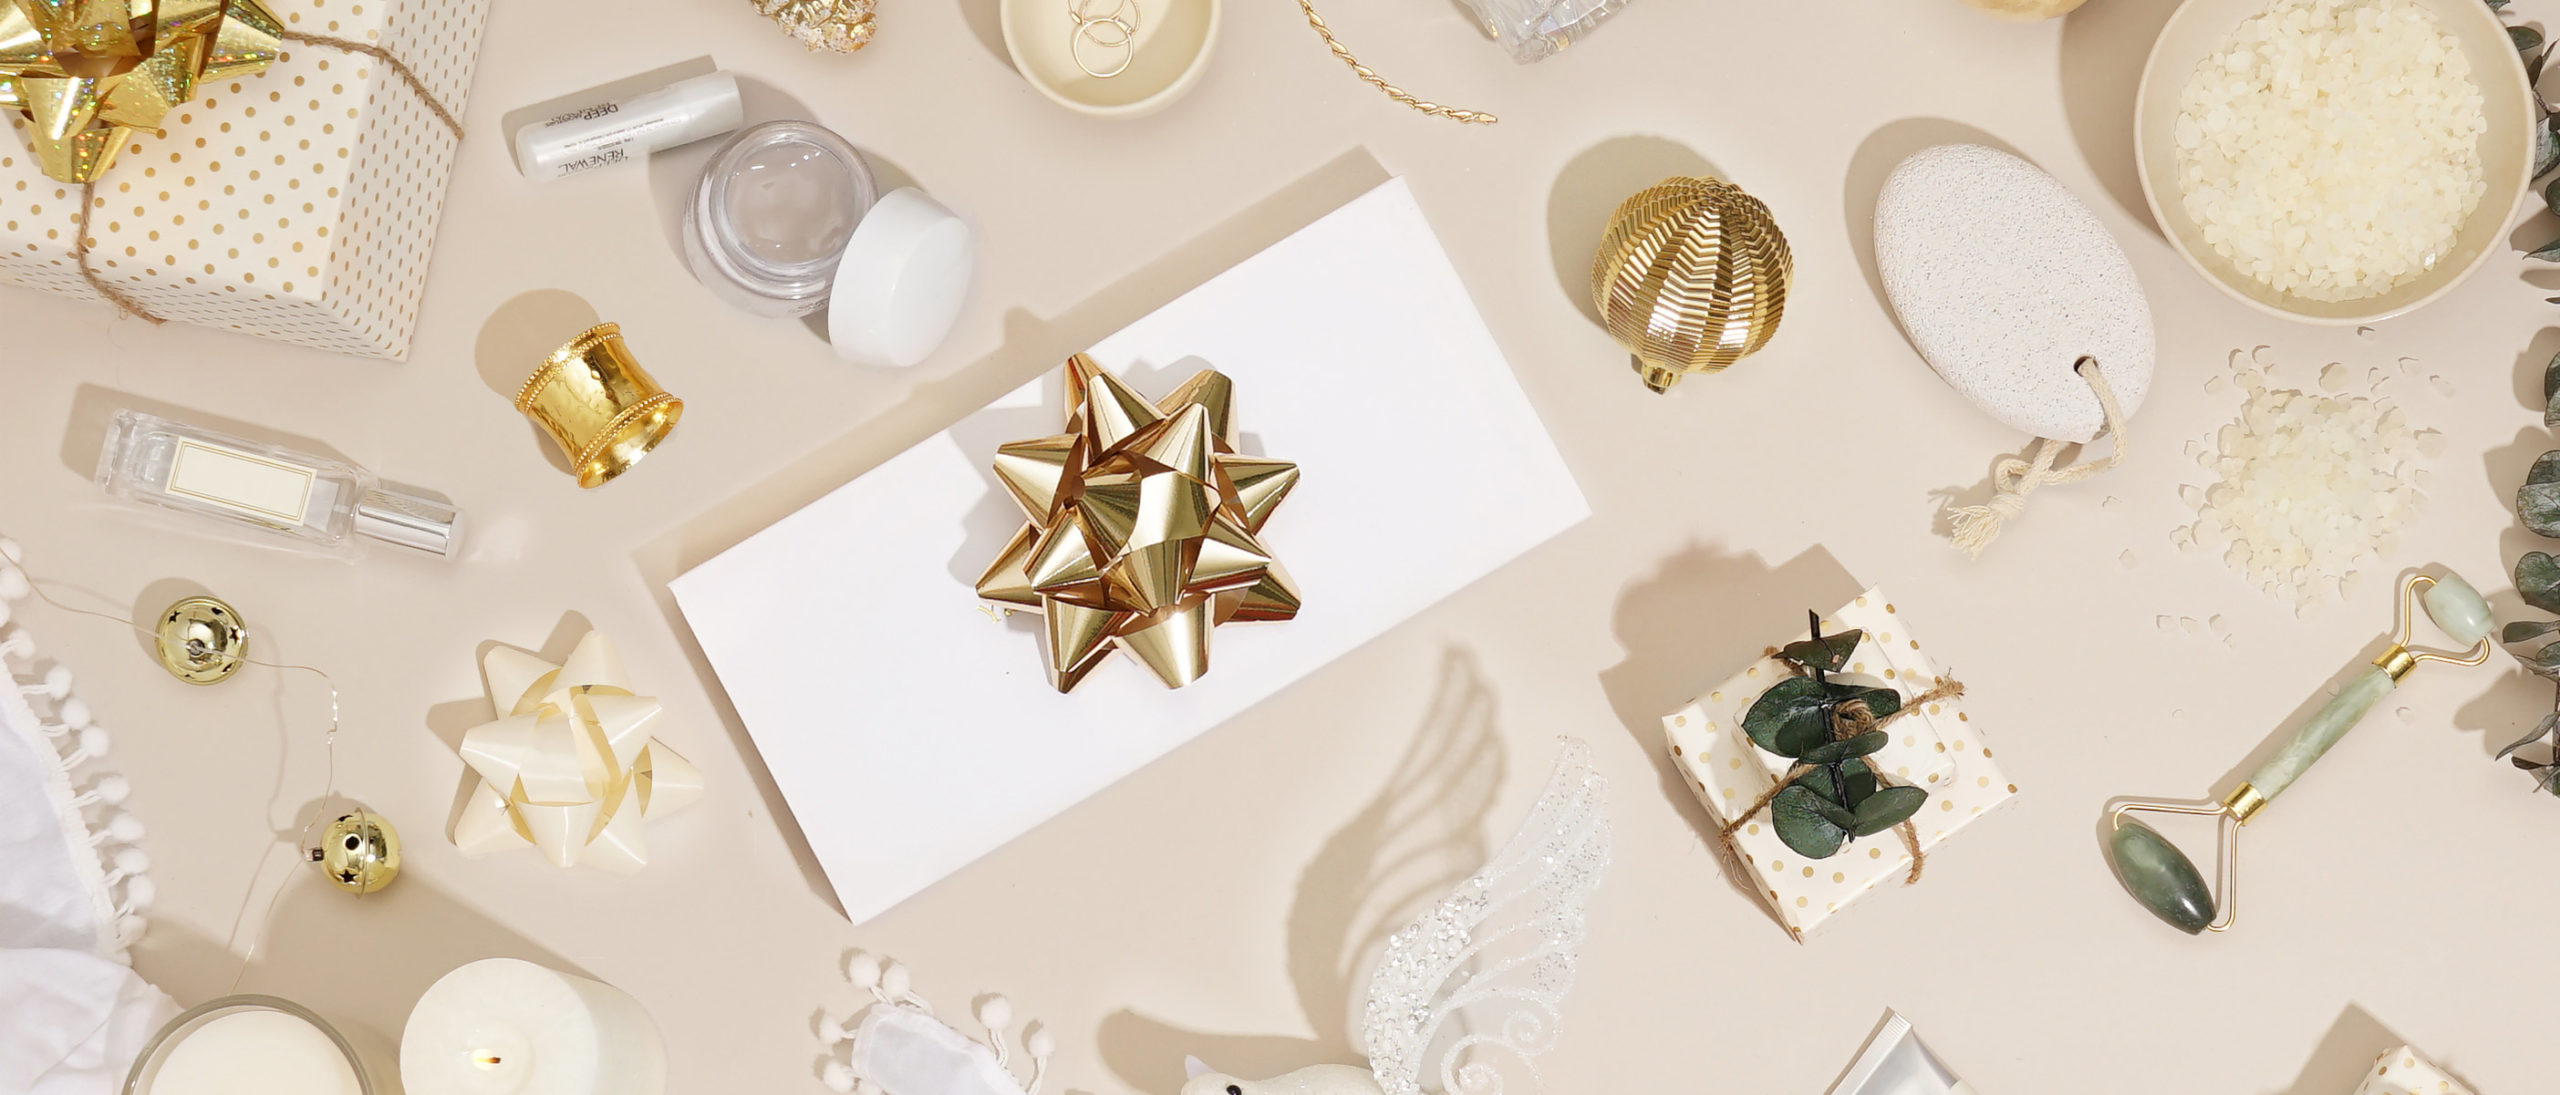 Delight Her With the Perfect Holiday Gift – Gift Ideas for Women